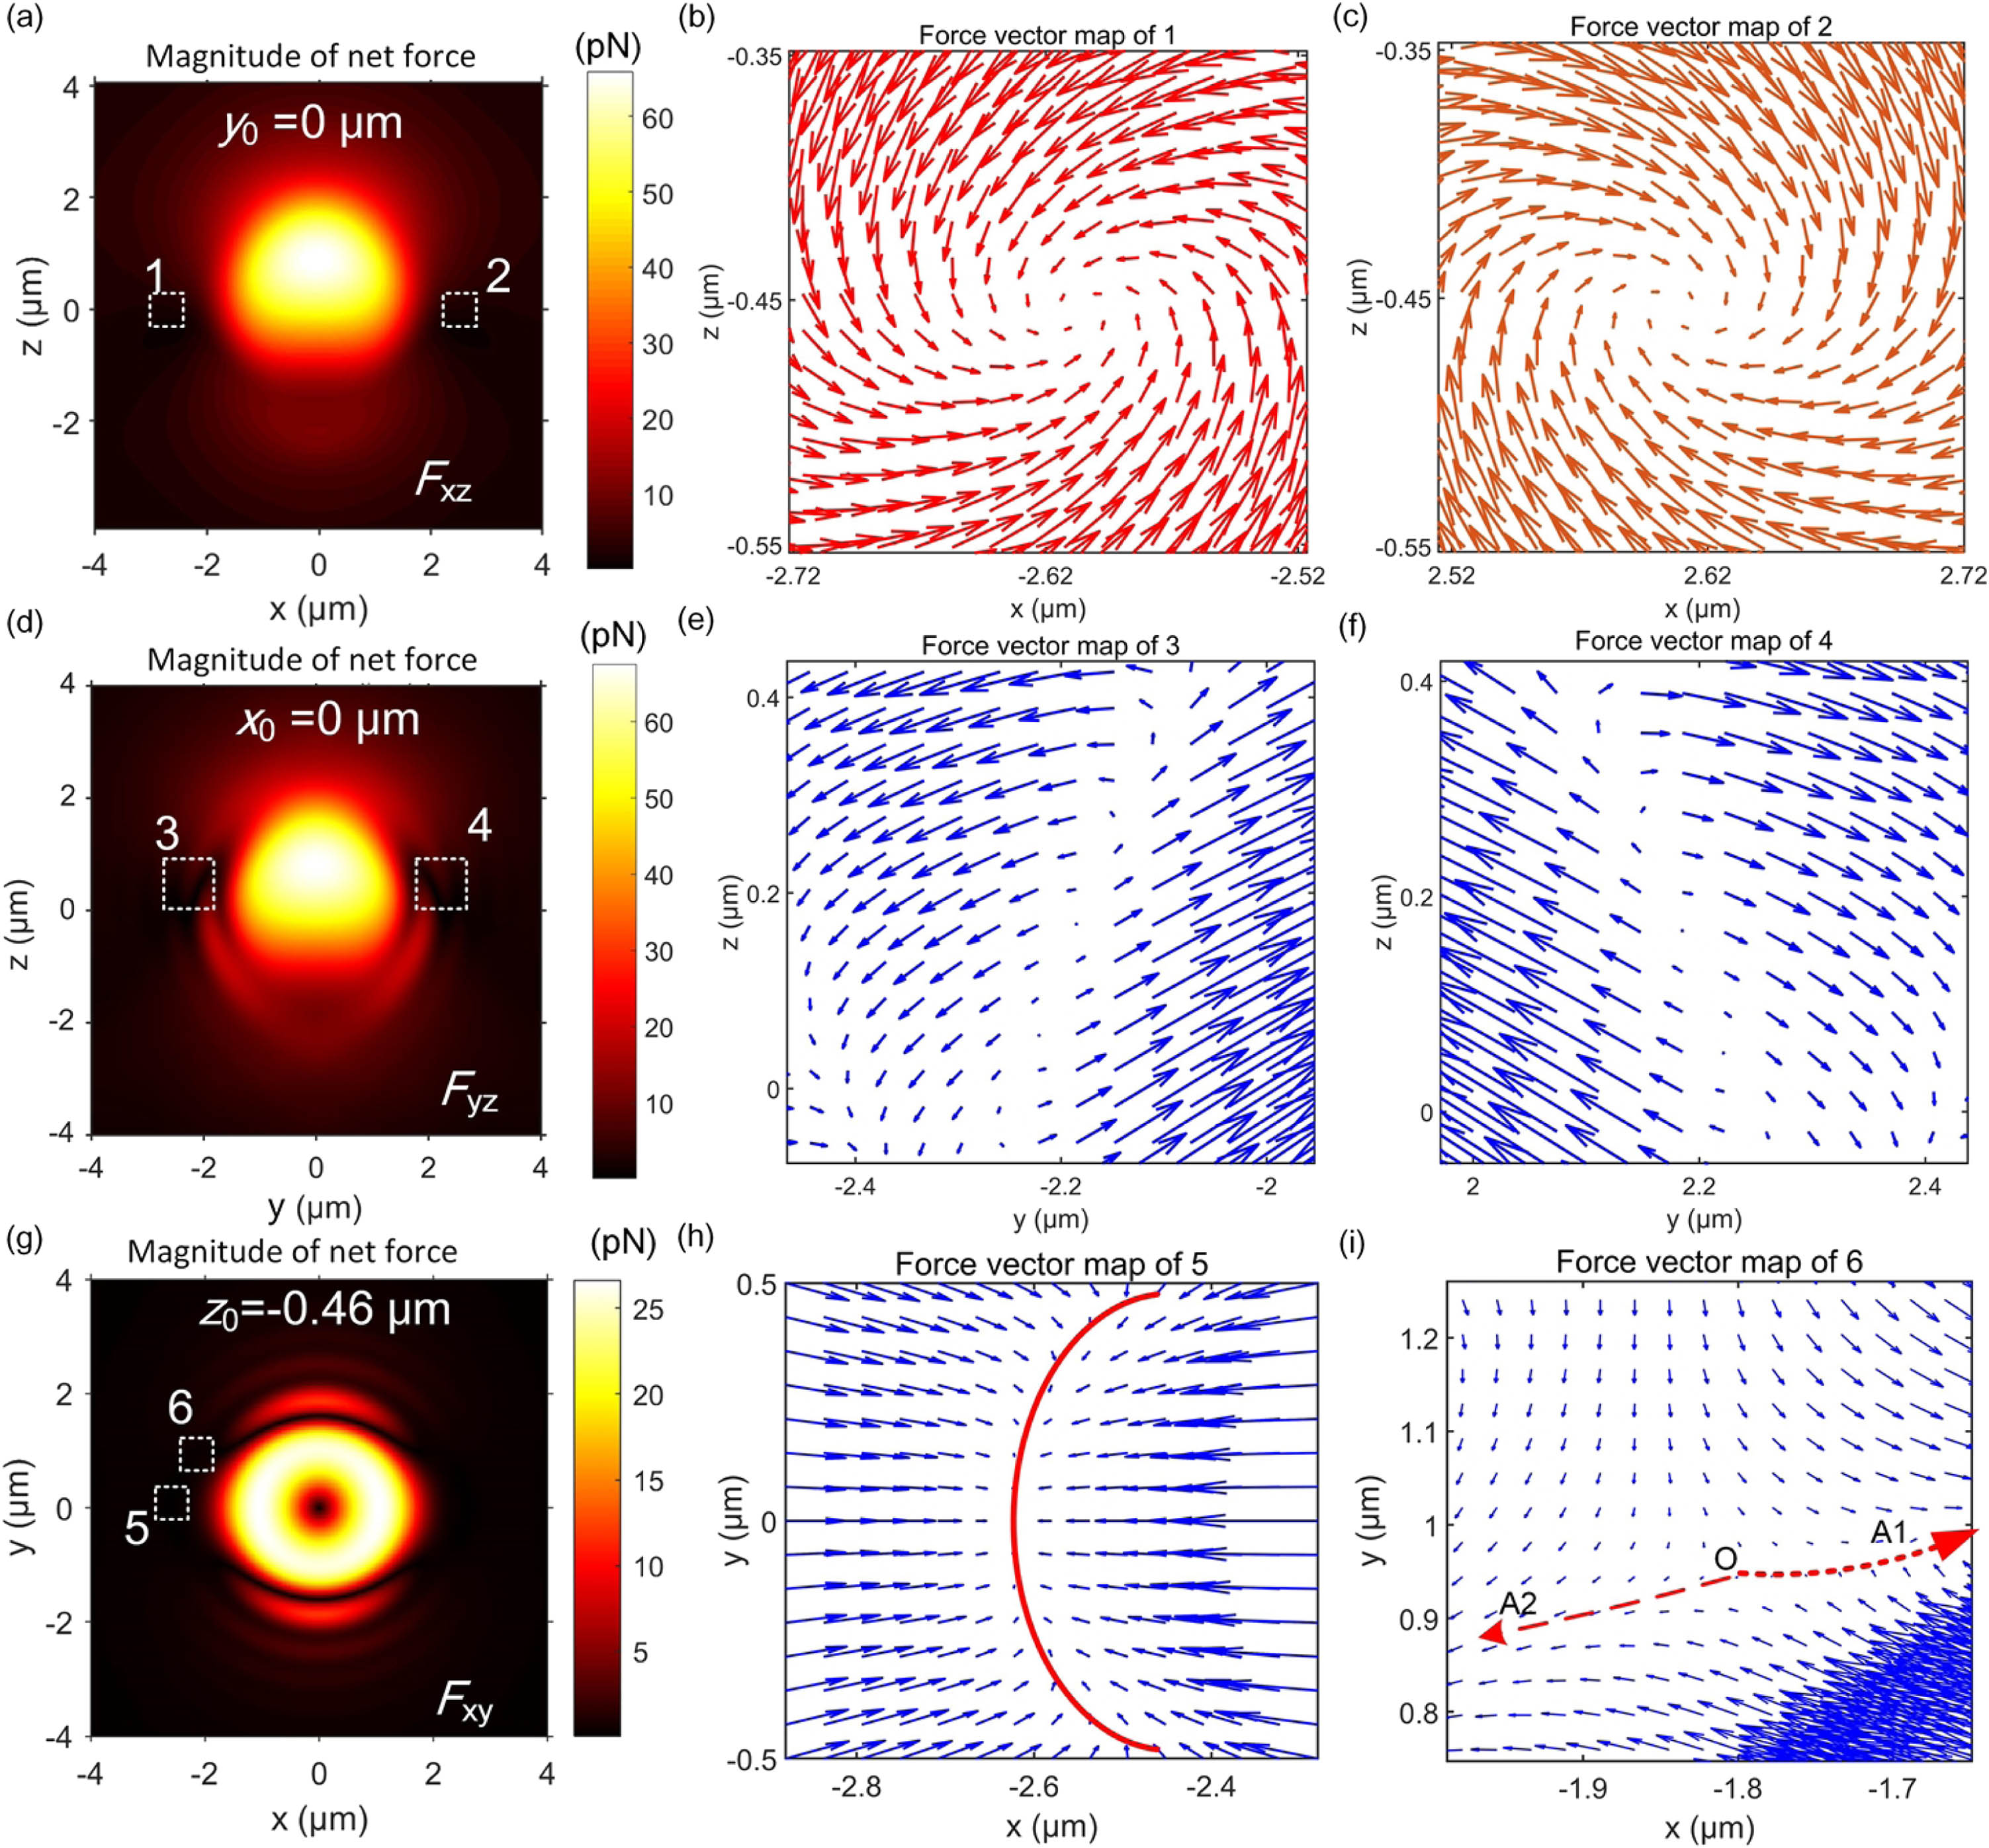 Simulated force fields acting on a gold particle with a radius of 1.5 μm trapped in water with trapping power of 10 mW. (a) Spatial distribution of the magnitude of the 2D net force Fxz on the particle in the x−z plane at y0=0 μm. (b), (c) Two-dimensional vector maps of net force in regions 1 and 2 indicated by dashed white squares in part (a). (d) Spatial distribution of the magnitude of the 2D net force Fyz on the particle in the y−z plane at x0=0 μm. (e), (f) Two-dimensional vector maps of net force in regions 3 and 4 indicated by dashed white squares in part (d). (g) Spatial distribution of the magnitude of the 2D net force Fxy on the particle in the x−y plane at z0=−0.46 μm. (h), (i) Two-dimensional vector maps of net force in regions 5 and 6 indicated by dashed white squares in part (g). The red line in (h) denotes the possible positions for confining the gold particle. Point O in (i) denotes the unstable zero-force position. Arrows A1 and A2 indicate the possible directions that the particle will be pushed to. The 2D quantity Fij satisfies the relation Fij=(Fi2+Fj2)0.5, where Fi and Fj denote the forces pointing to the i and j axes (i,j=x,y, or z).